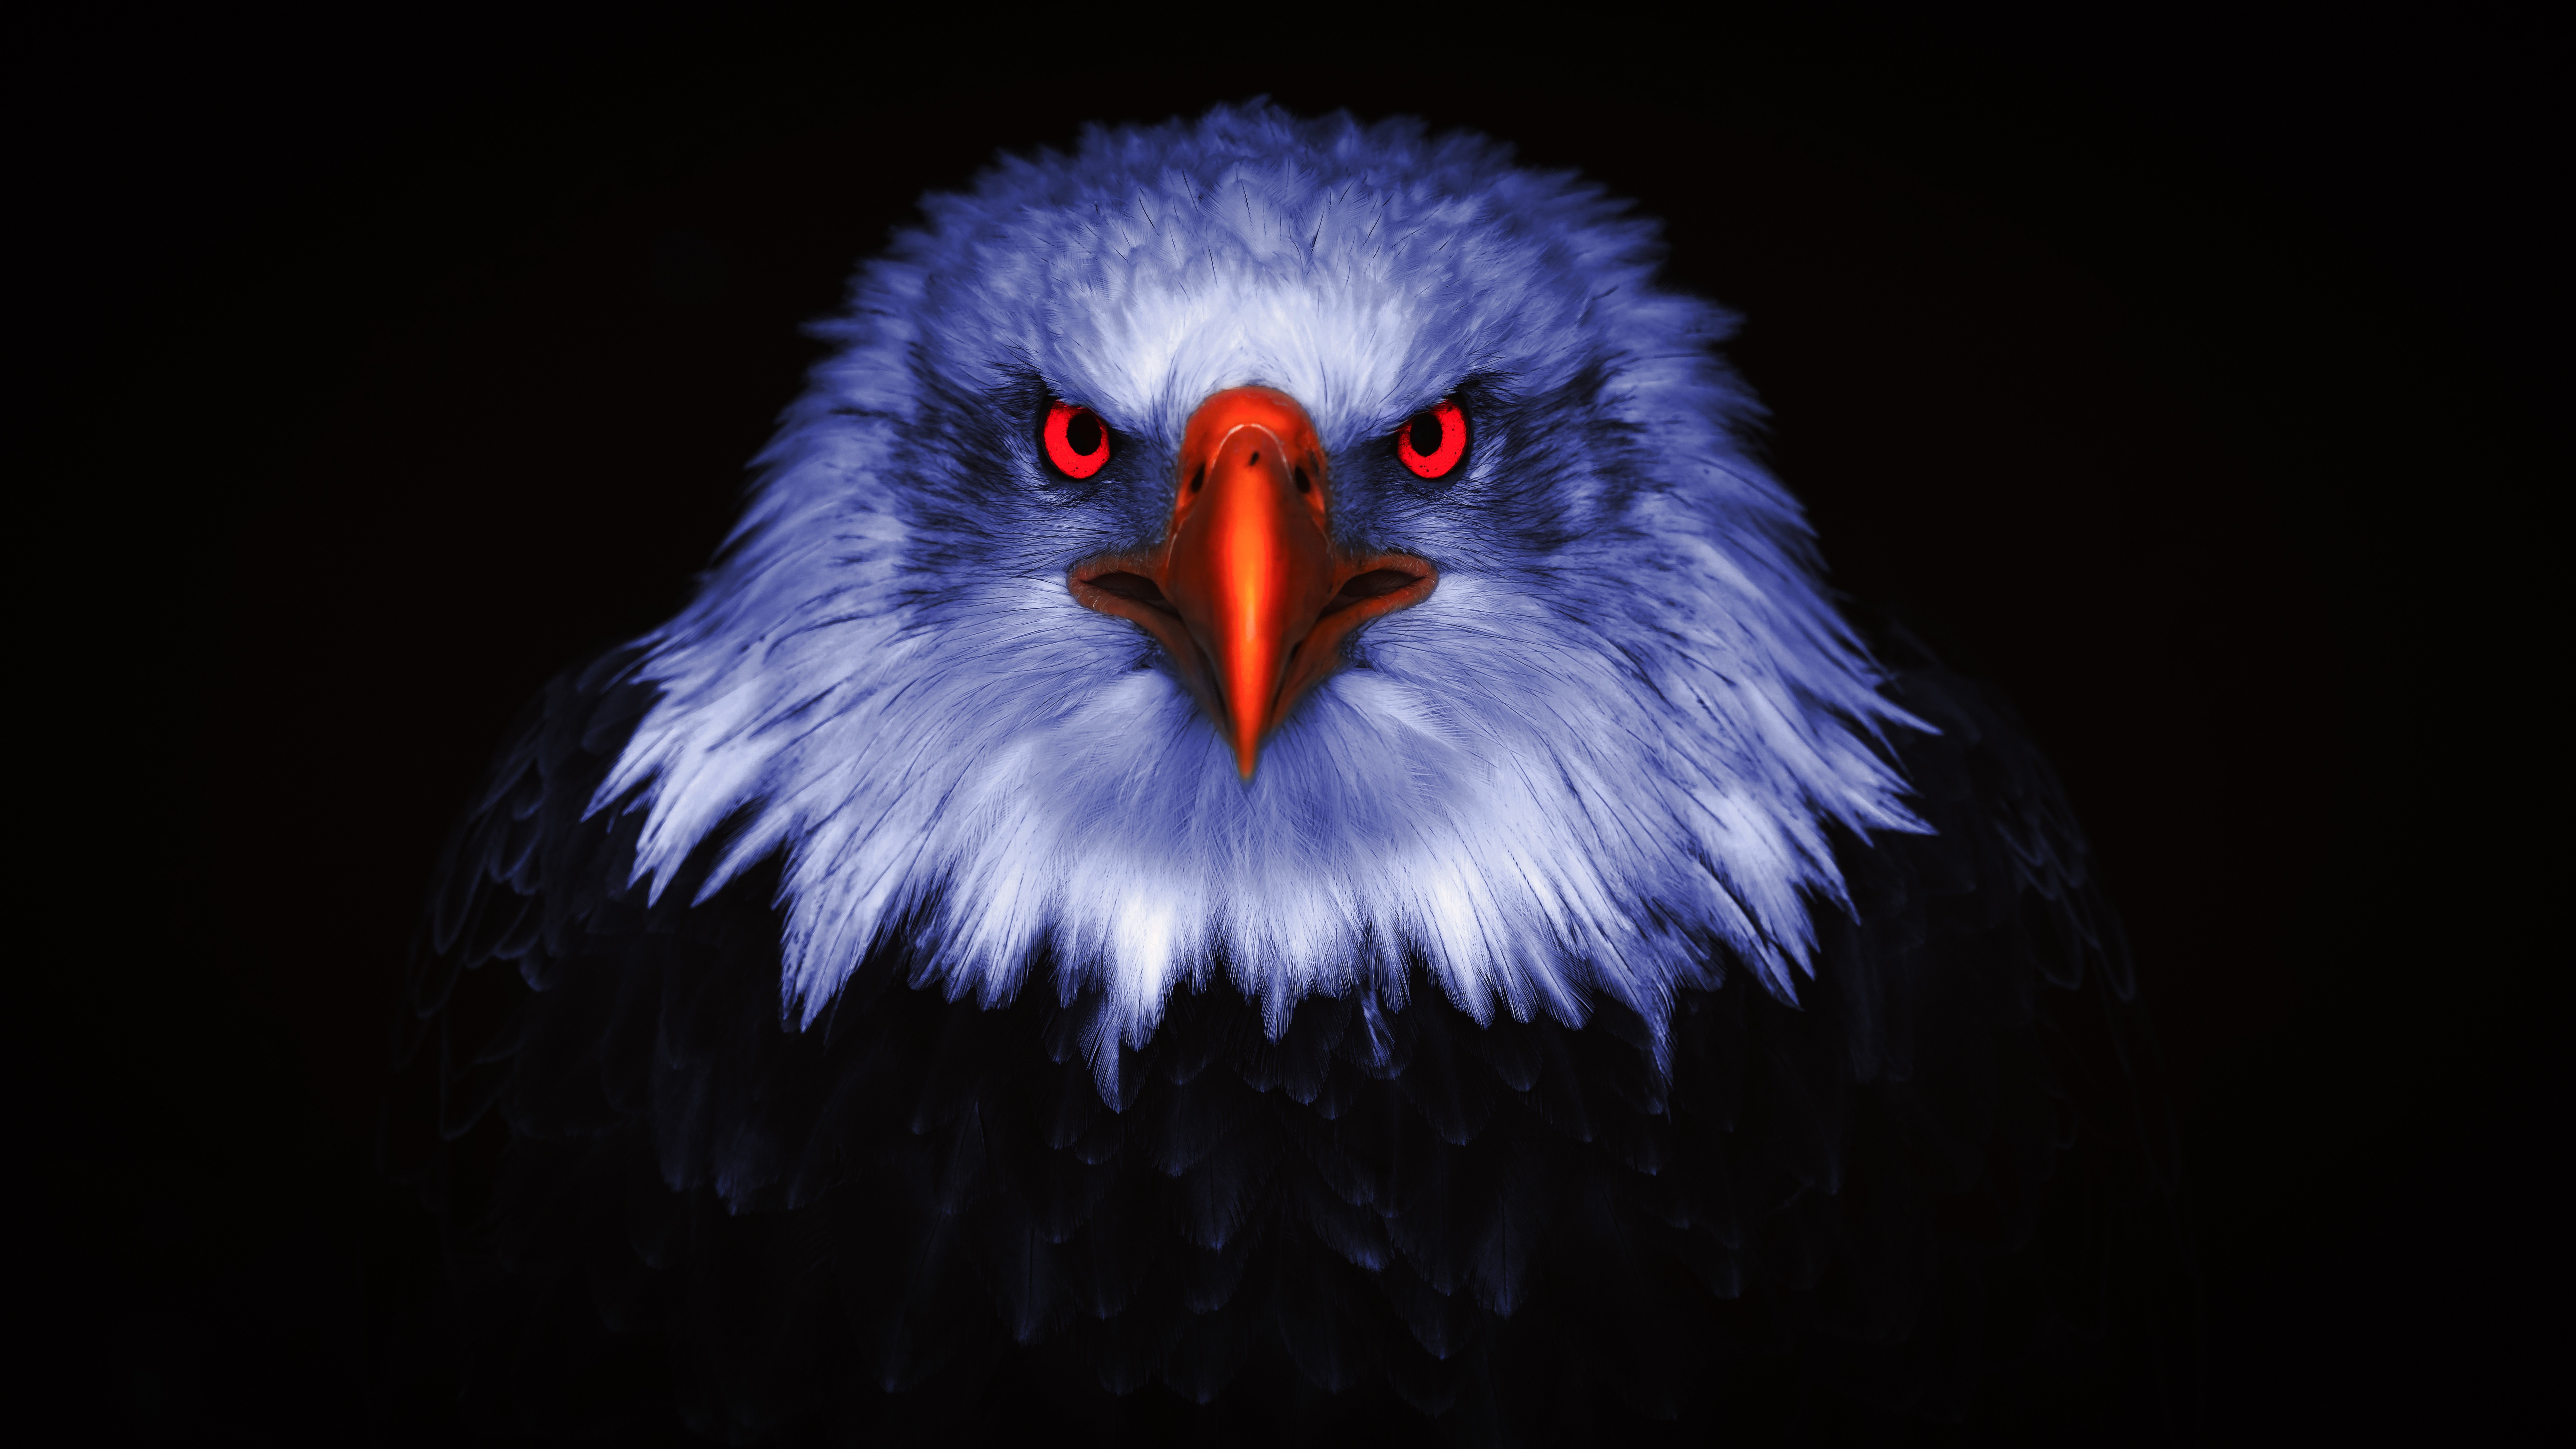 7680x4320 Eagle Dark Illustration 8k 8k HD 4k Wallpapers, Images,  Backgrounds, Photos and Pictures